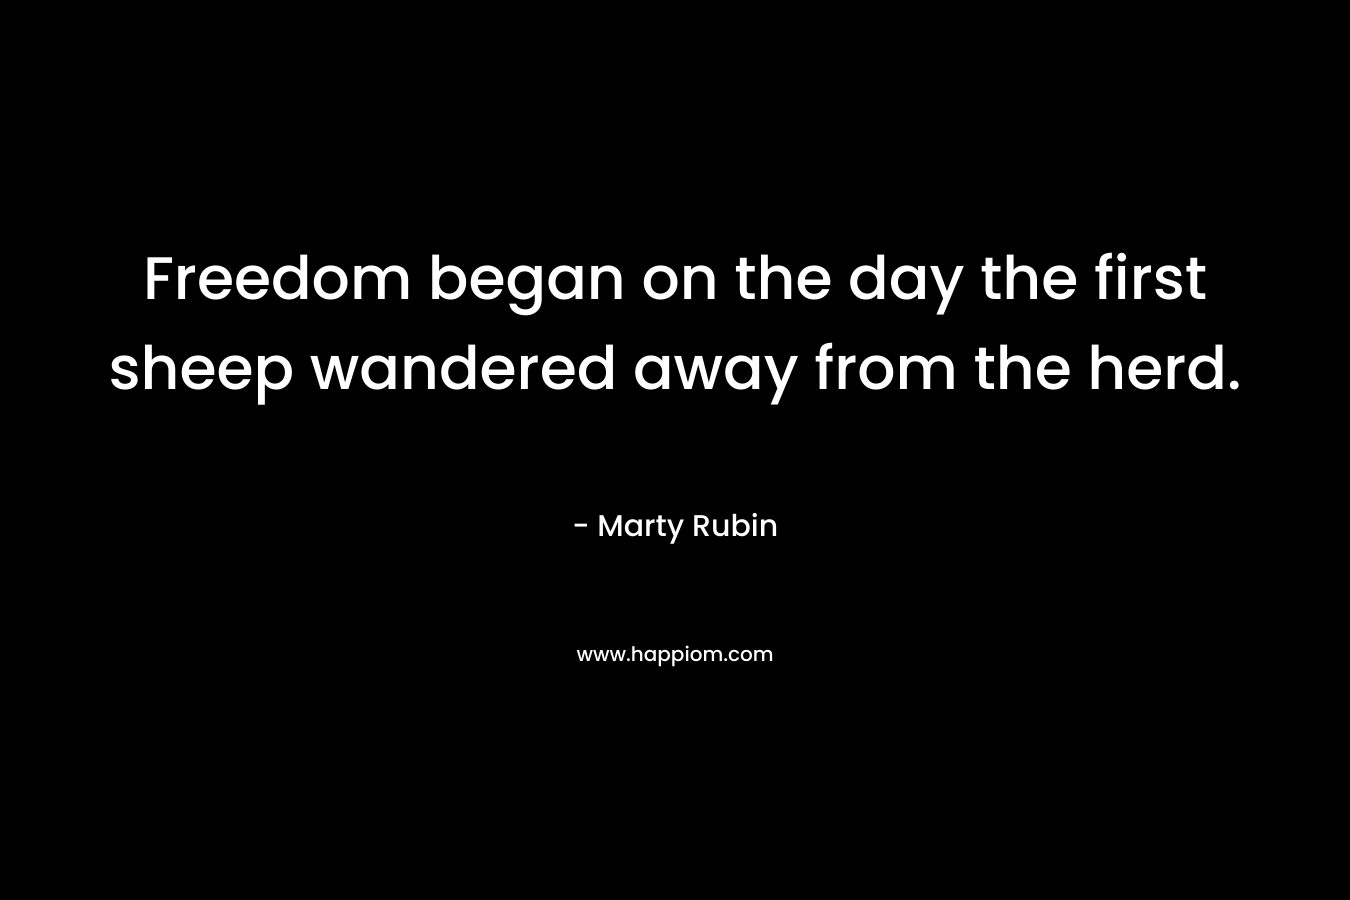 Freedom began on the day the first sheep wandered away from the herd. – Marty Rubin